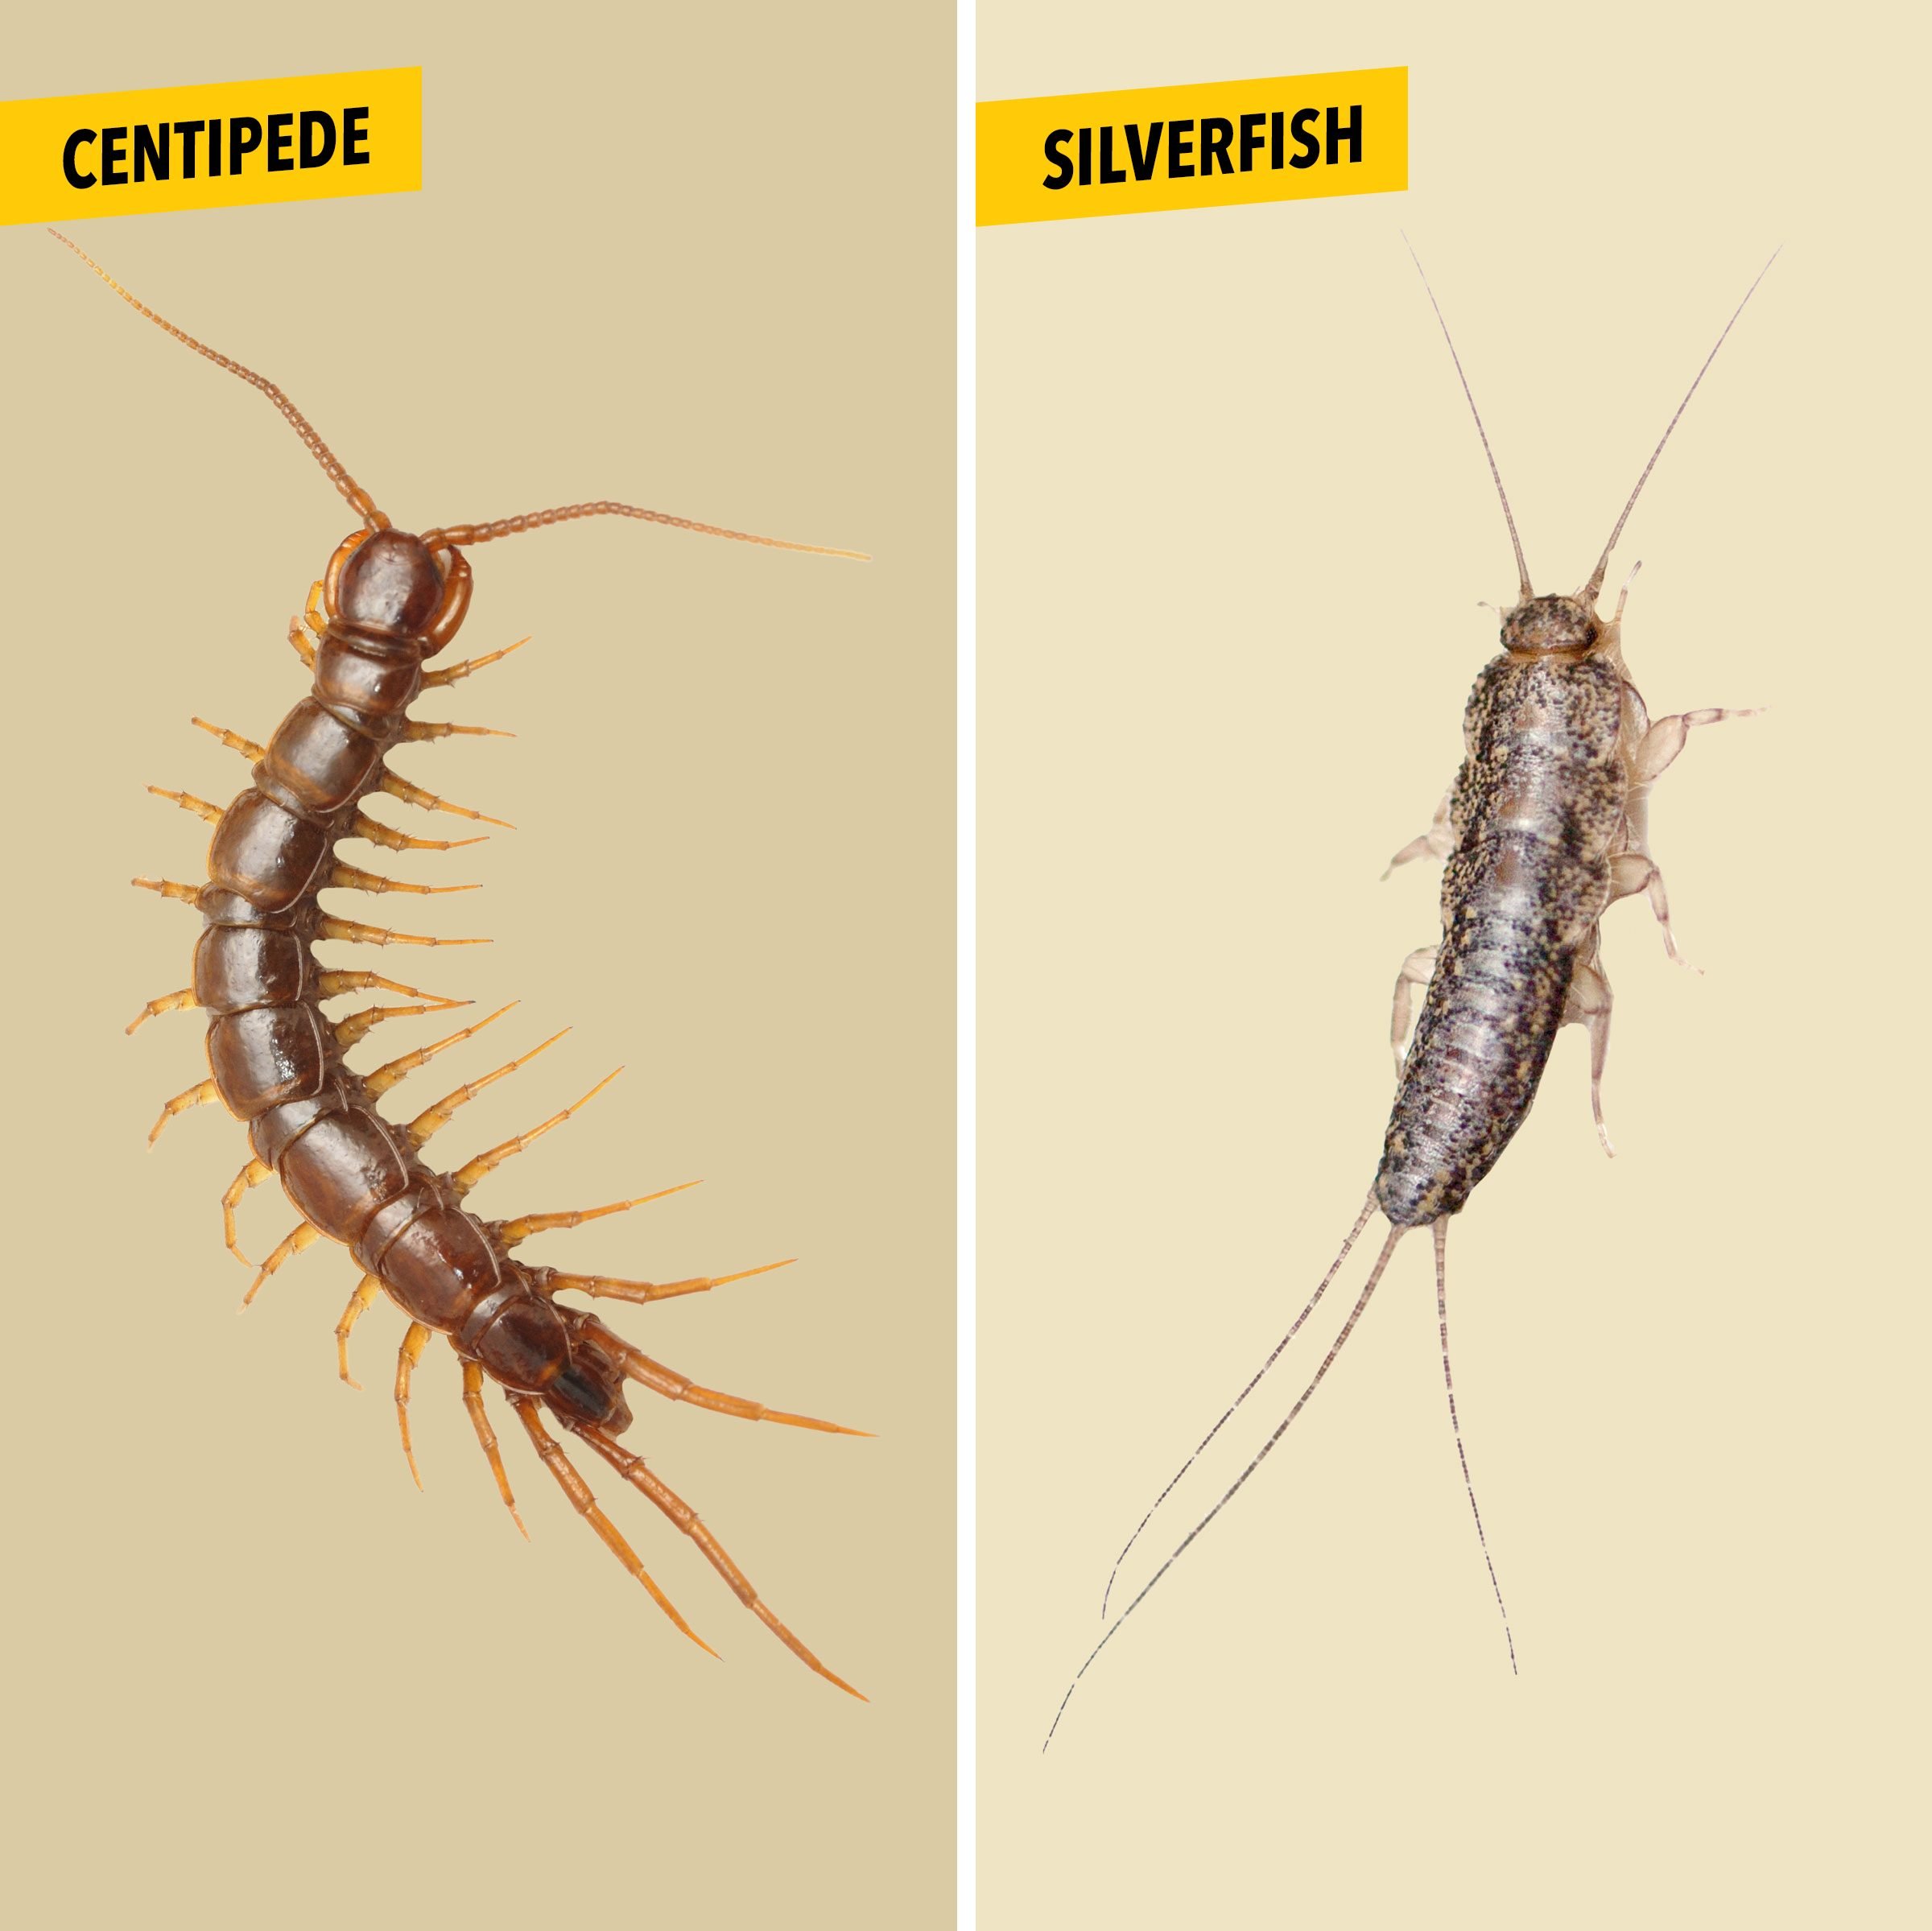 House Centipede vs. Silverfish: What's the Difference?